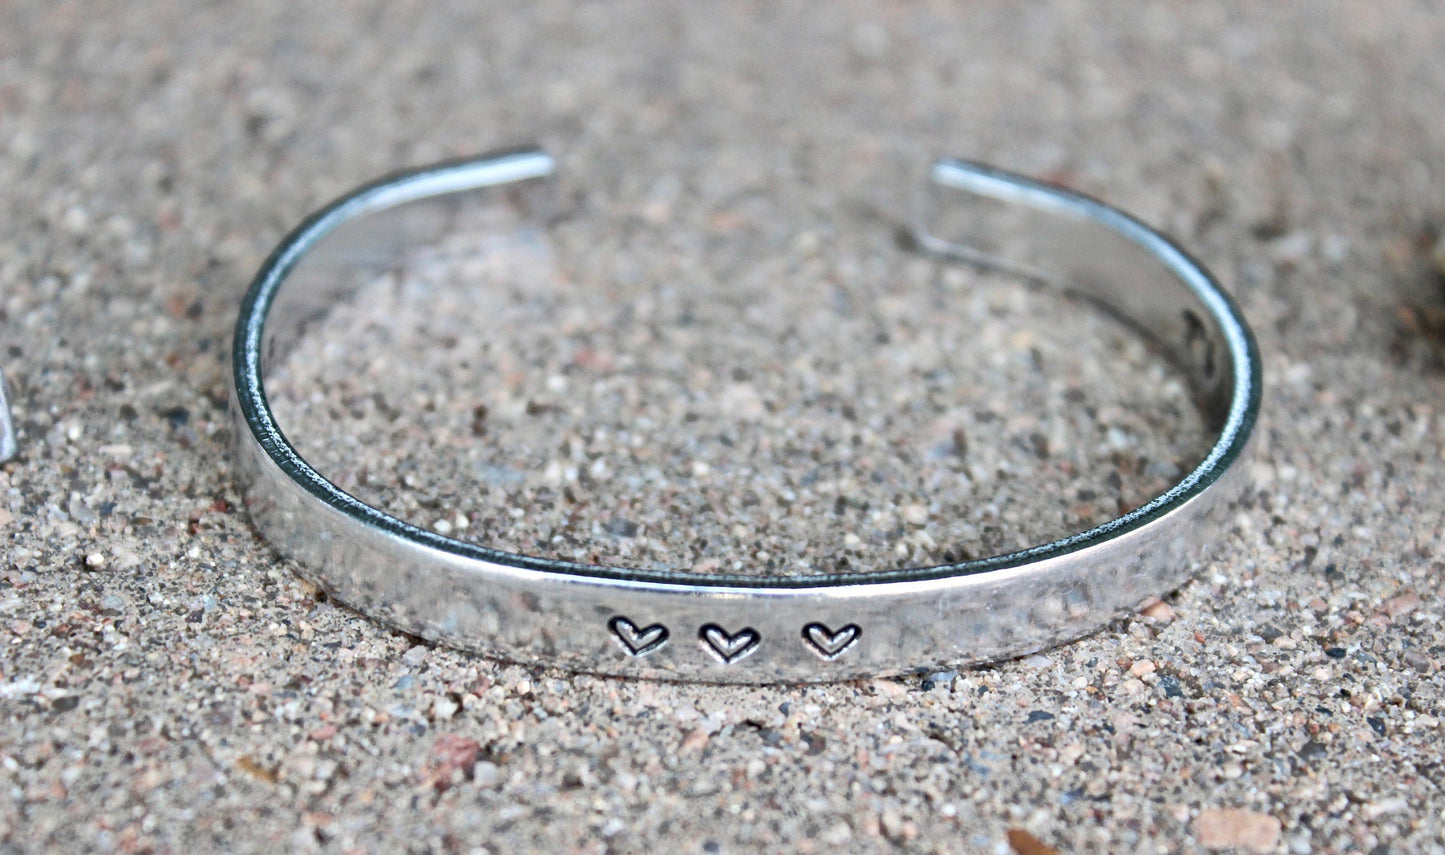 Mother of the Groom Gift, Aluminum Bangle Cuff Bracelet